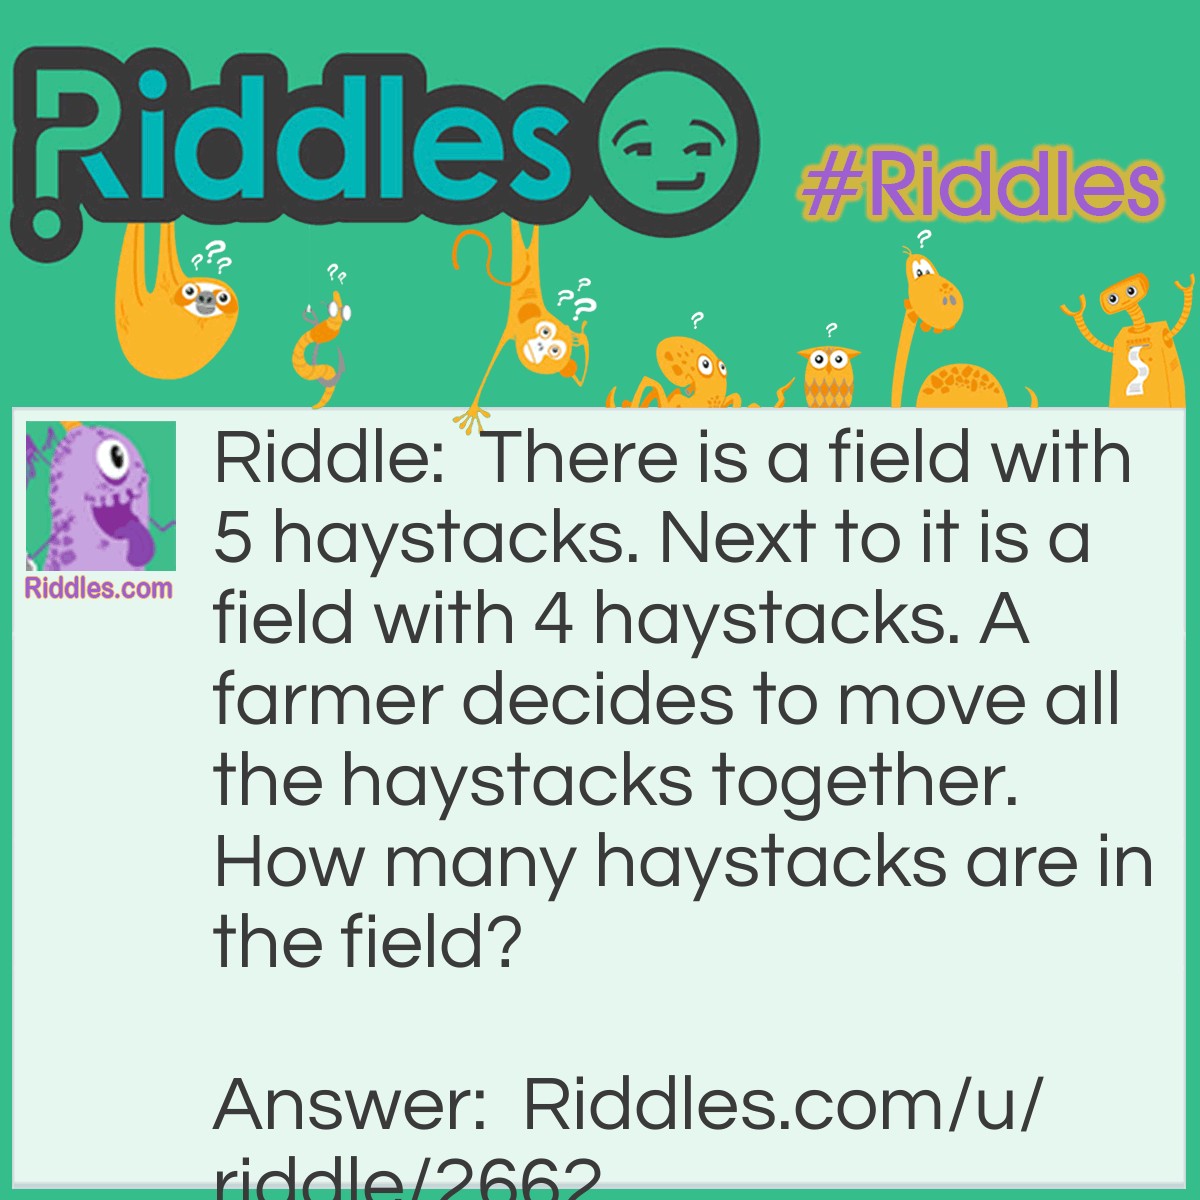 Riddle: There is a field with 5 haystacks. Next to it is a field with 4 haystacks. A farmer decides to move all the haystacks together. How many haystacks are in the field? Answer: 1 giant haystack.